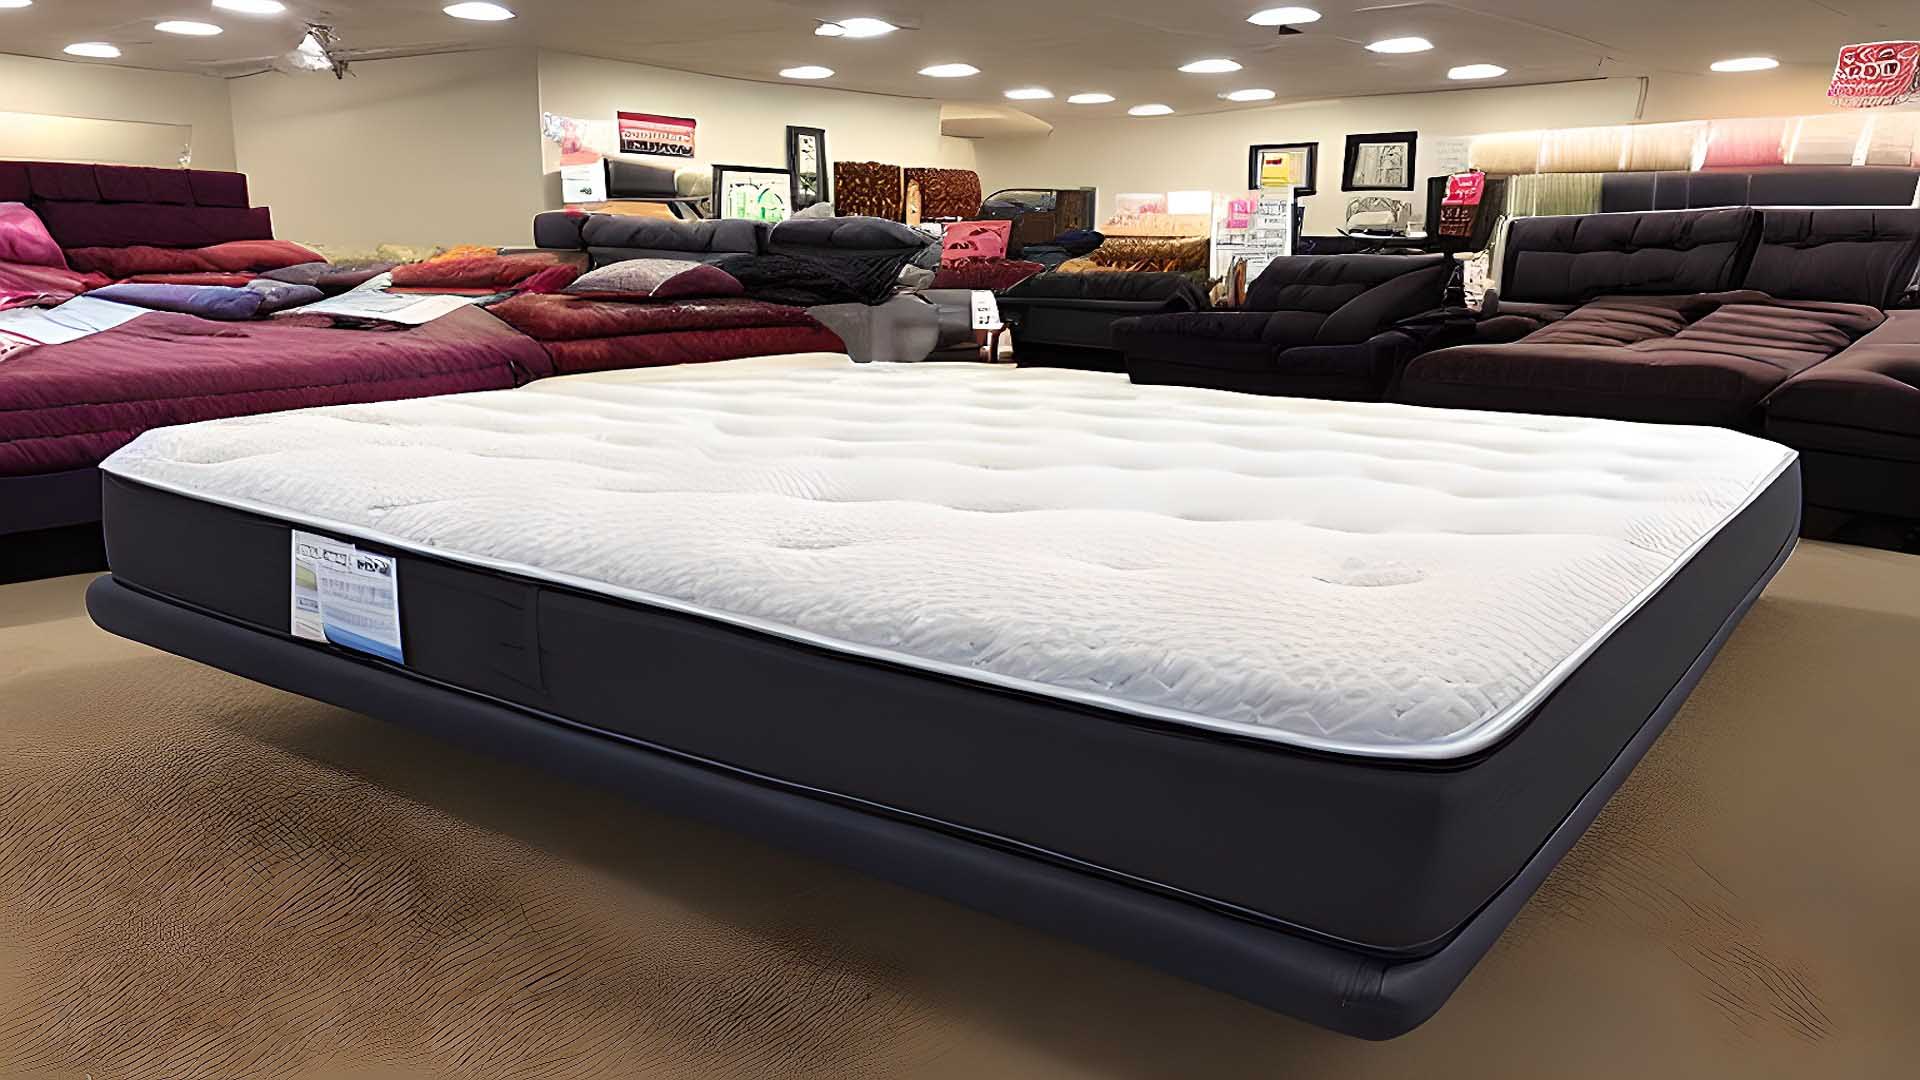 Mattress Sales & Deals in Lawrence, MA